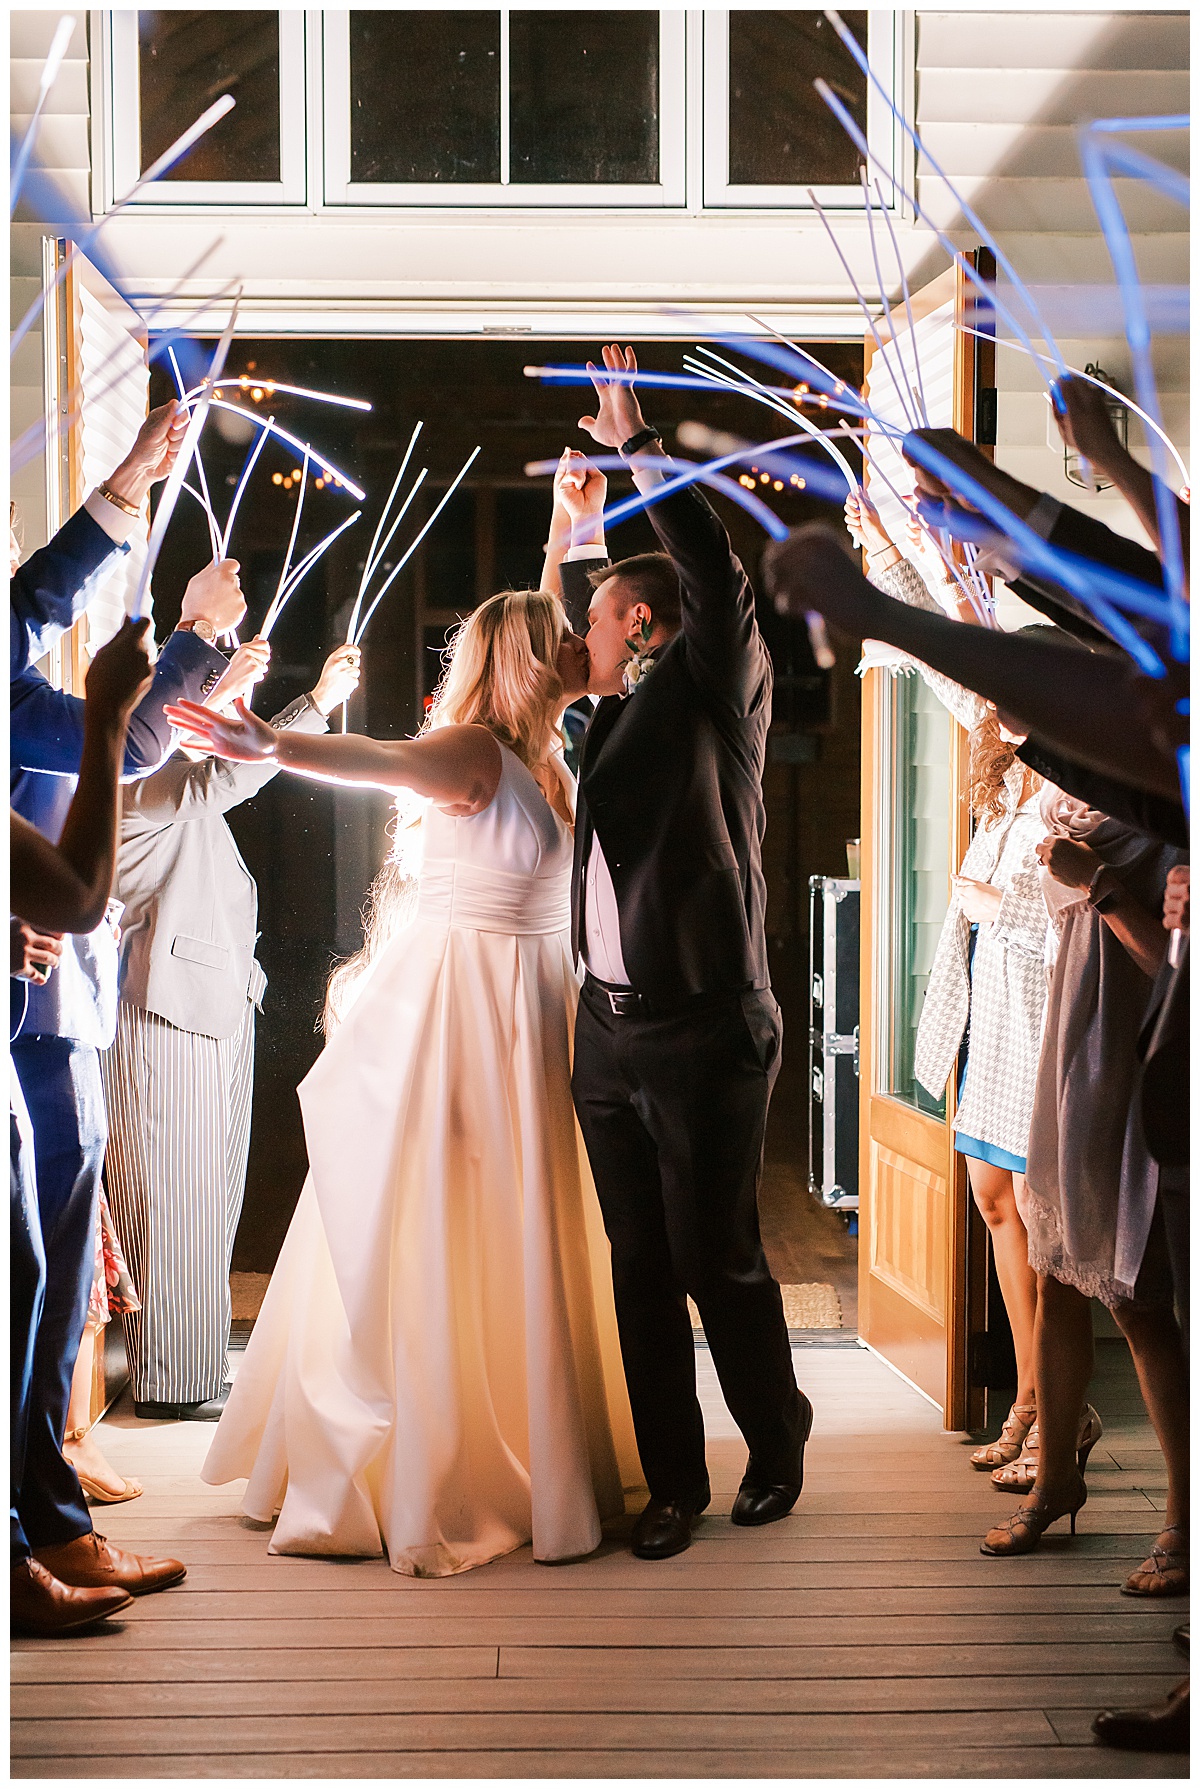 bride and groom exit, 48 fields exit, glowsticks